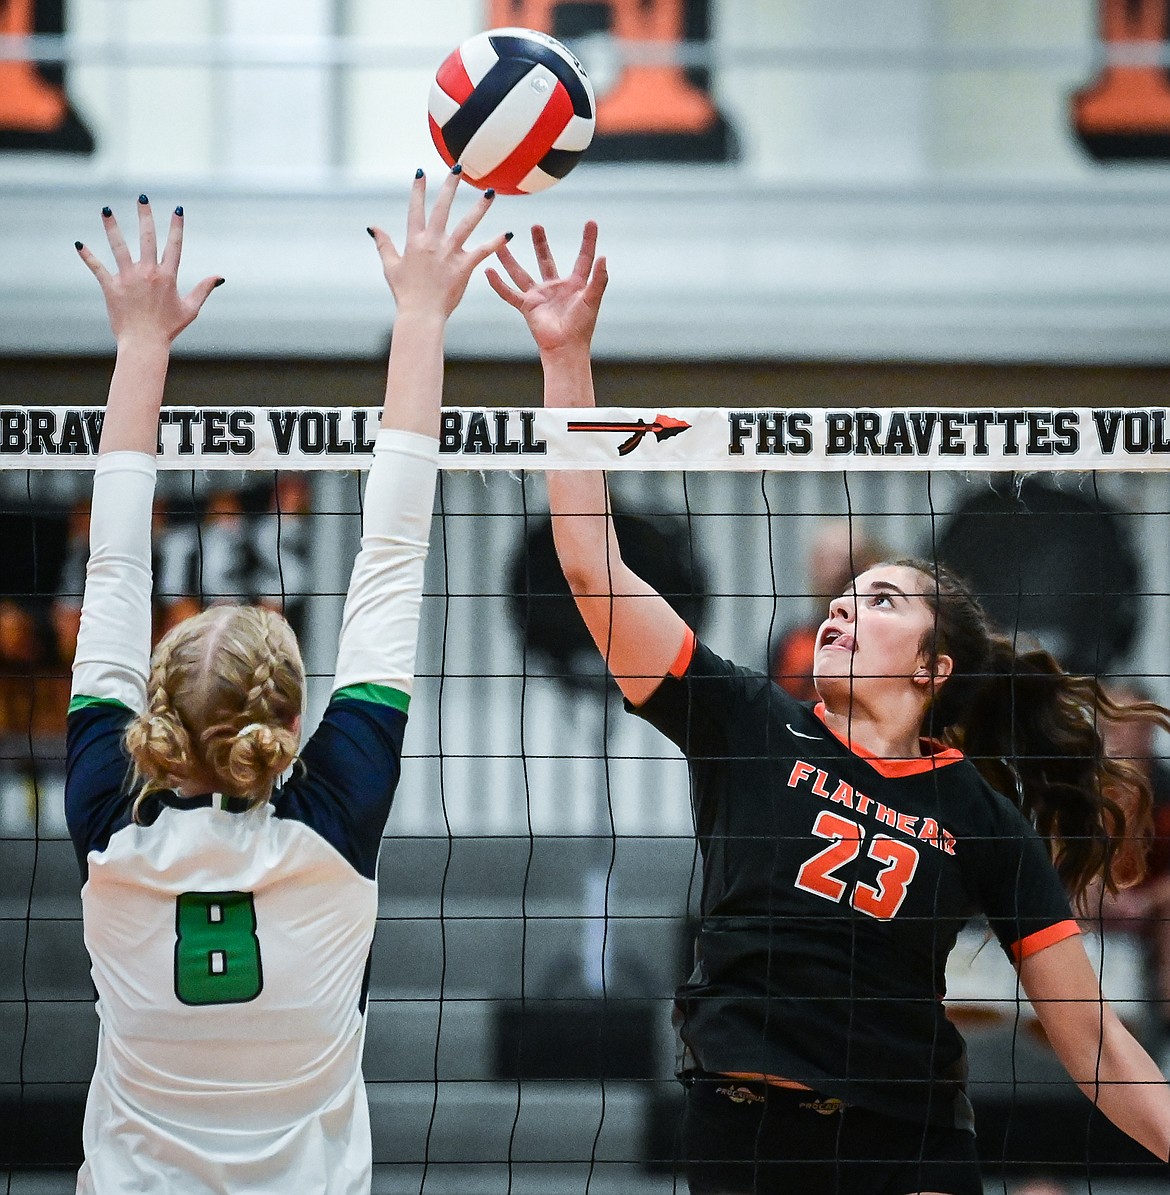 Flathead's Sienna Sterck (23) goes up for a kill against Glacier during crosstown volleyball at Flathead High School on Thursday, Sept. 29. (Casey Kreider/Daily Inter Lake)